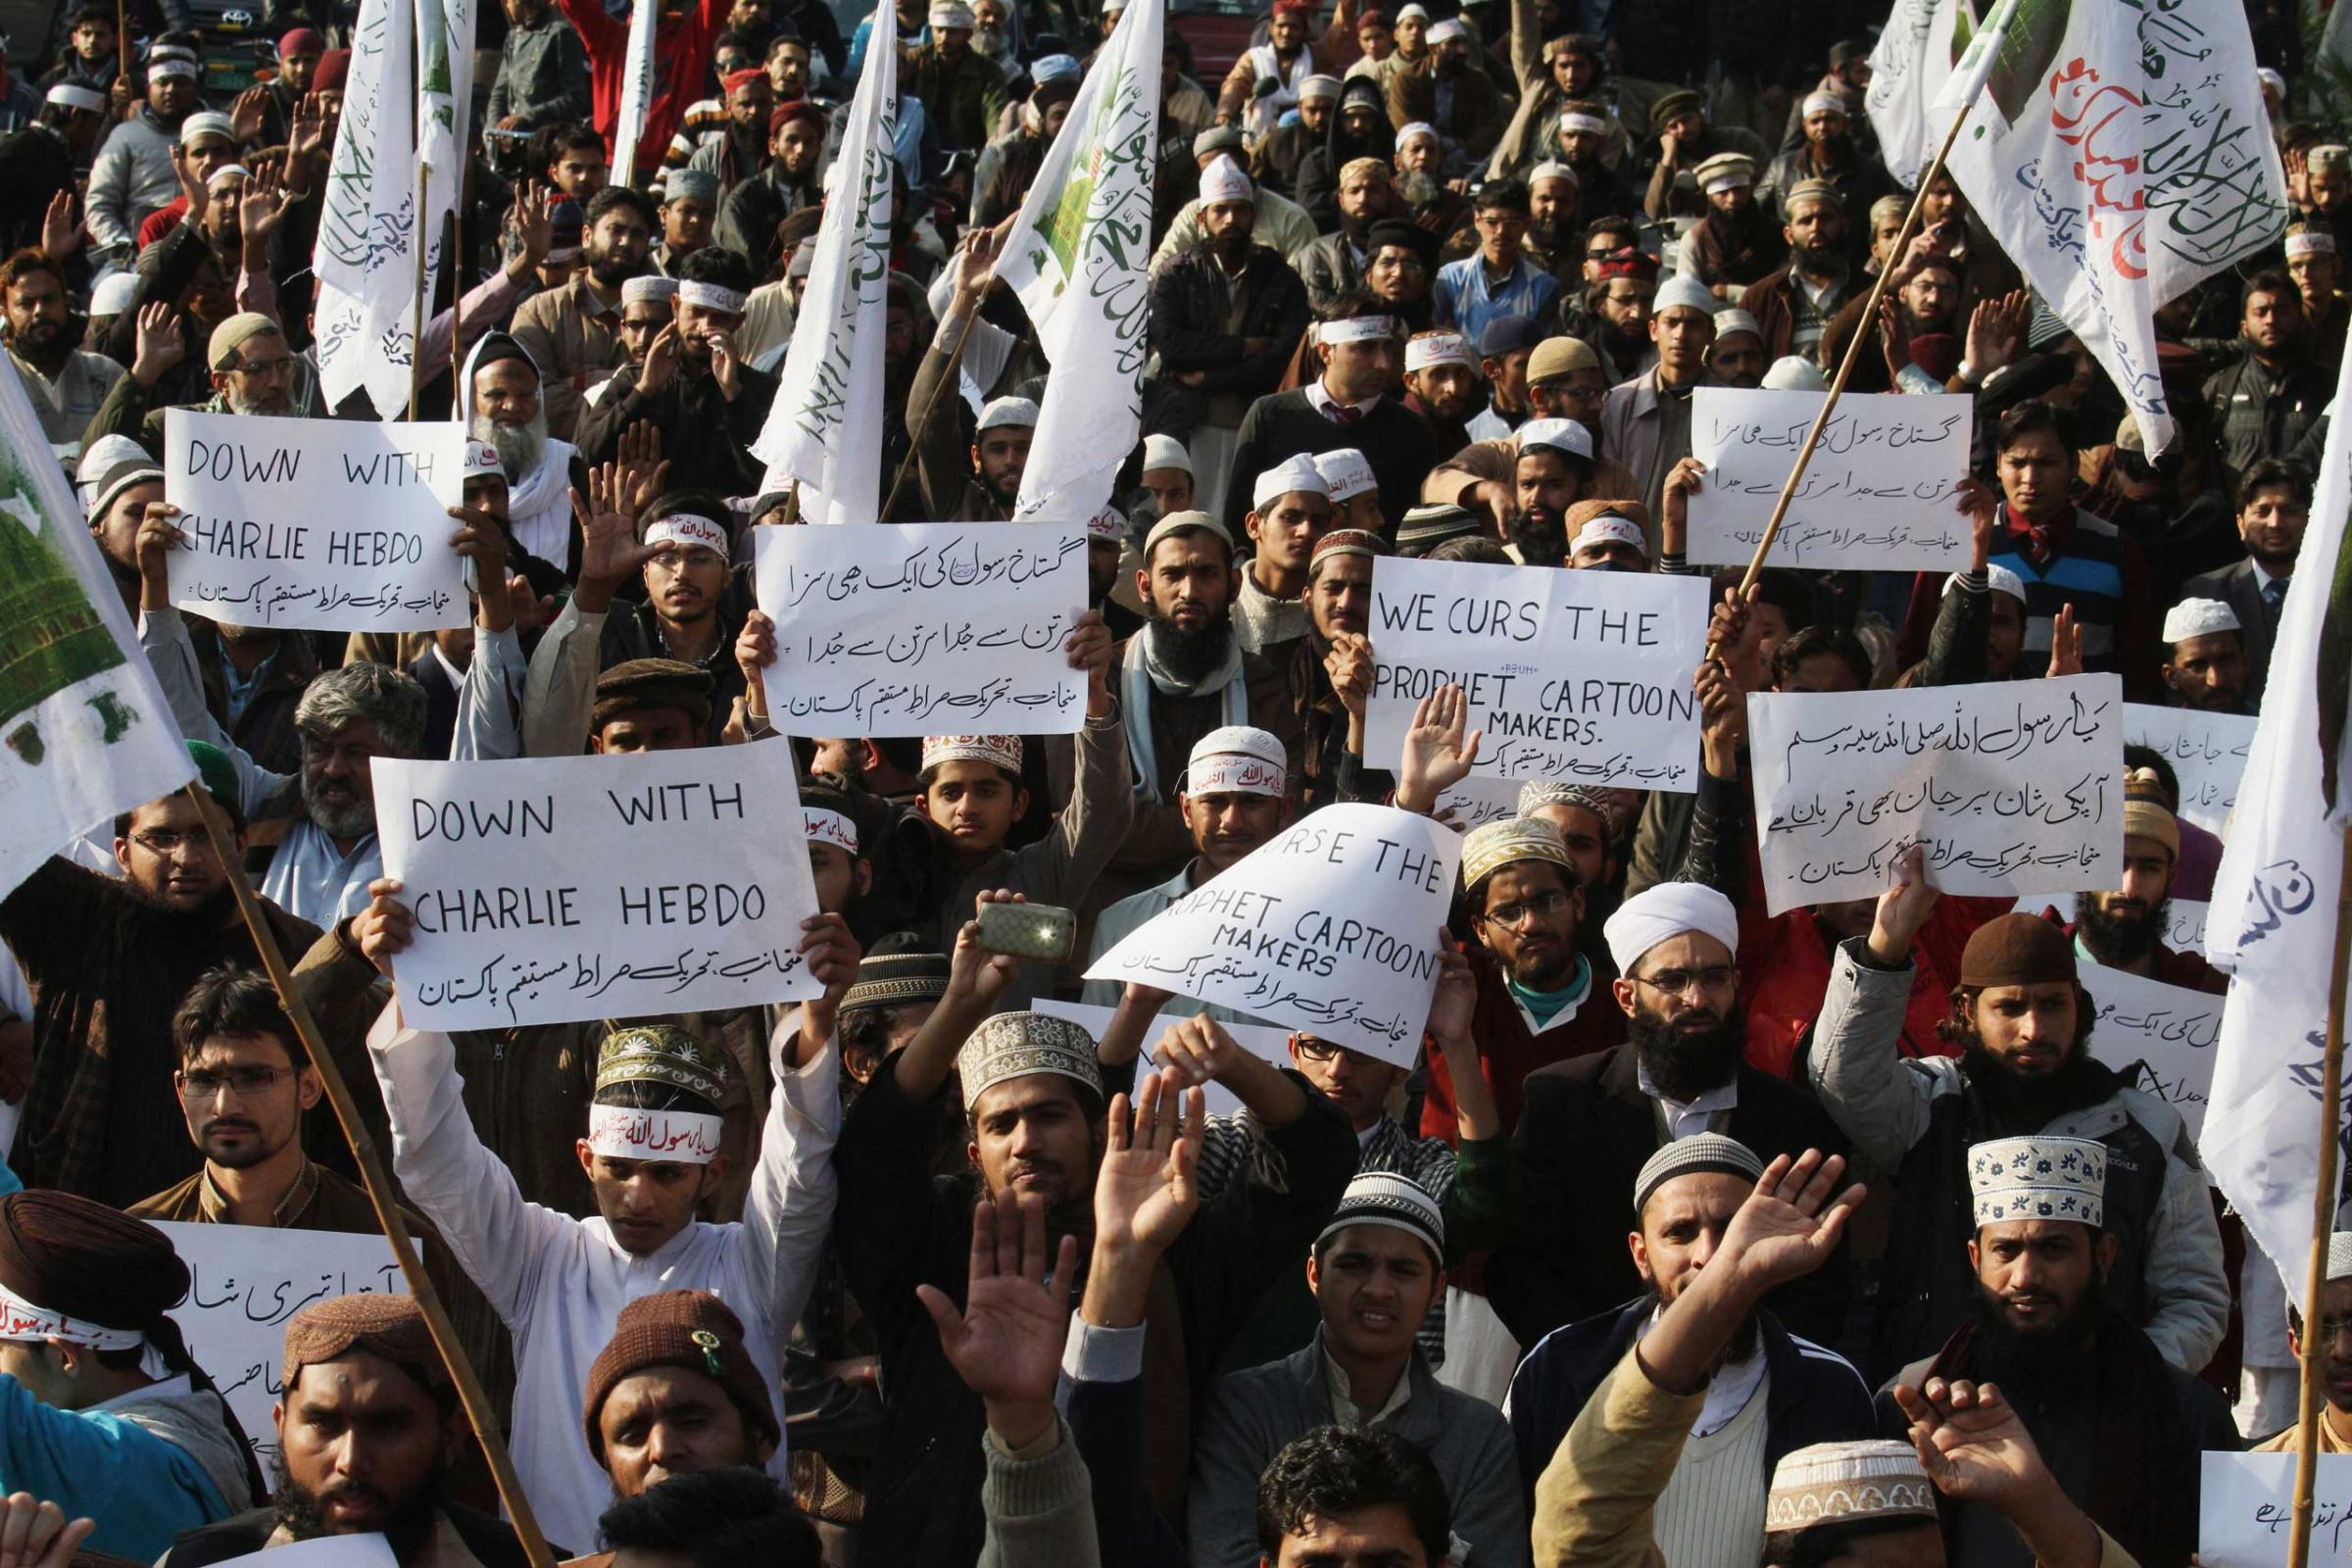 Supporters of a Pakistani religious group rally to protest against caricatures published in the French magazine Charlie Hebdo, in Lahore, Pakistan on Jan. 15, 2015.